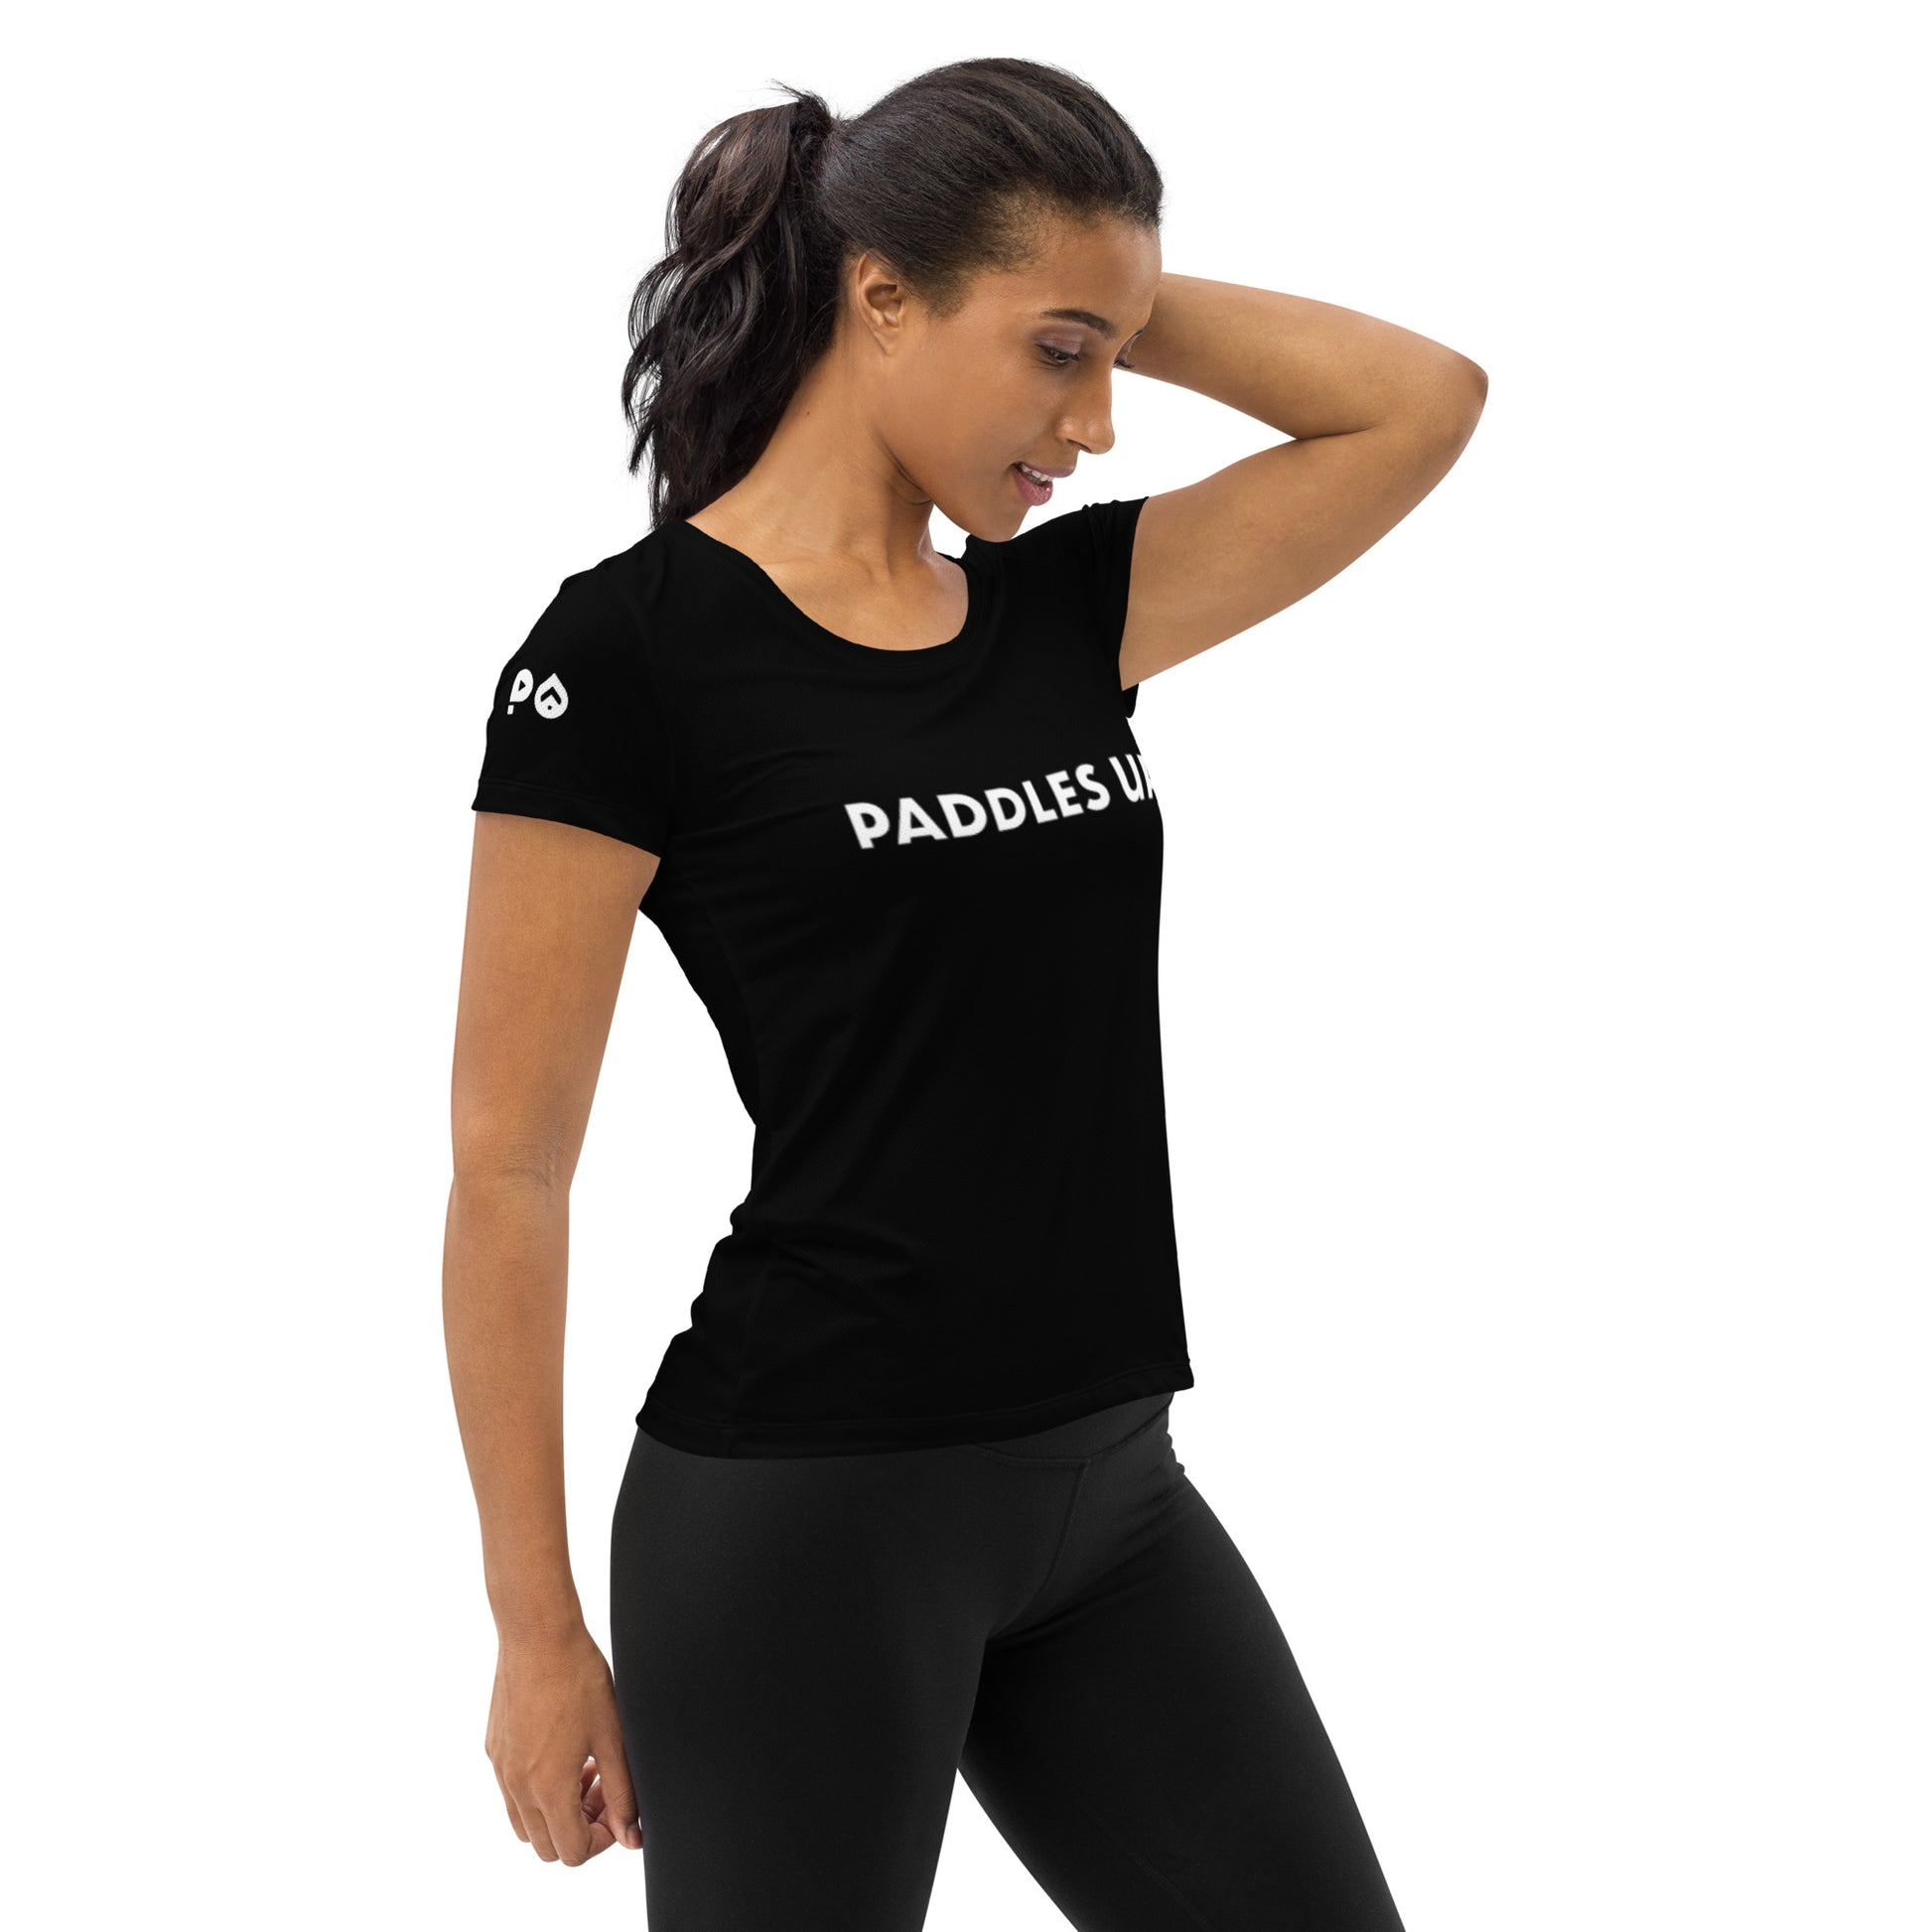 Paddle's Up Women's Athletic T-Shirt – Paddles Up DB